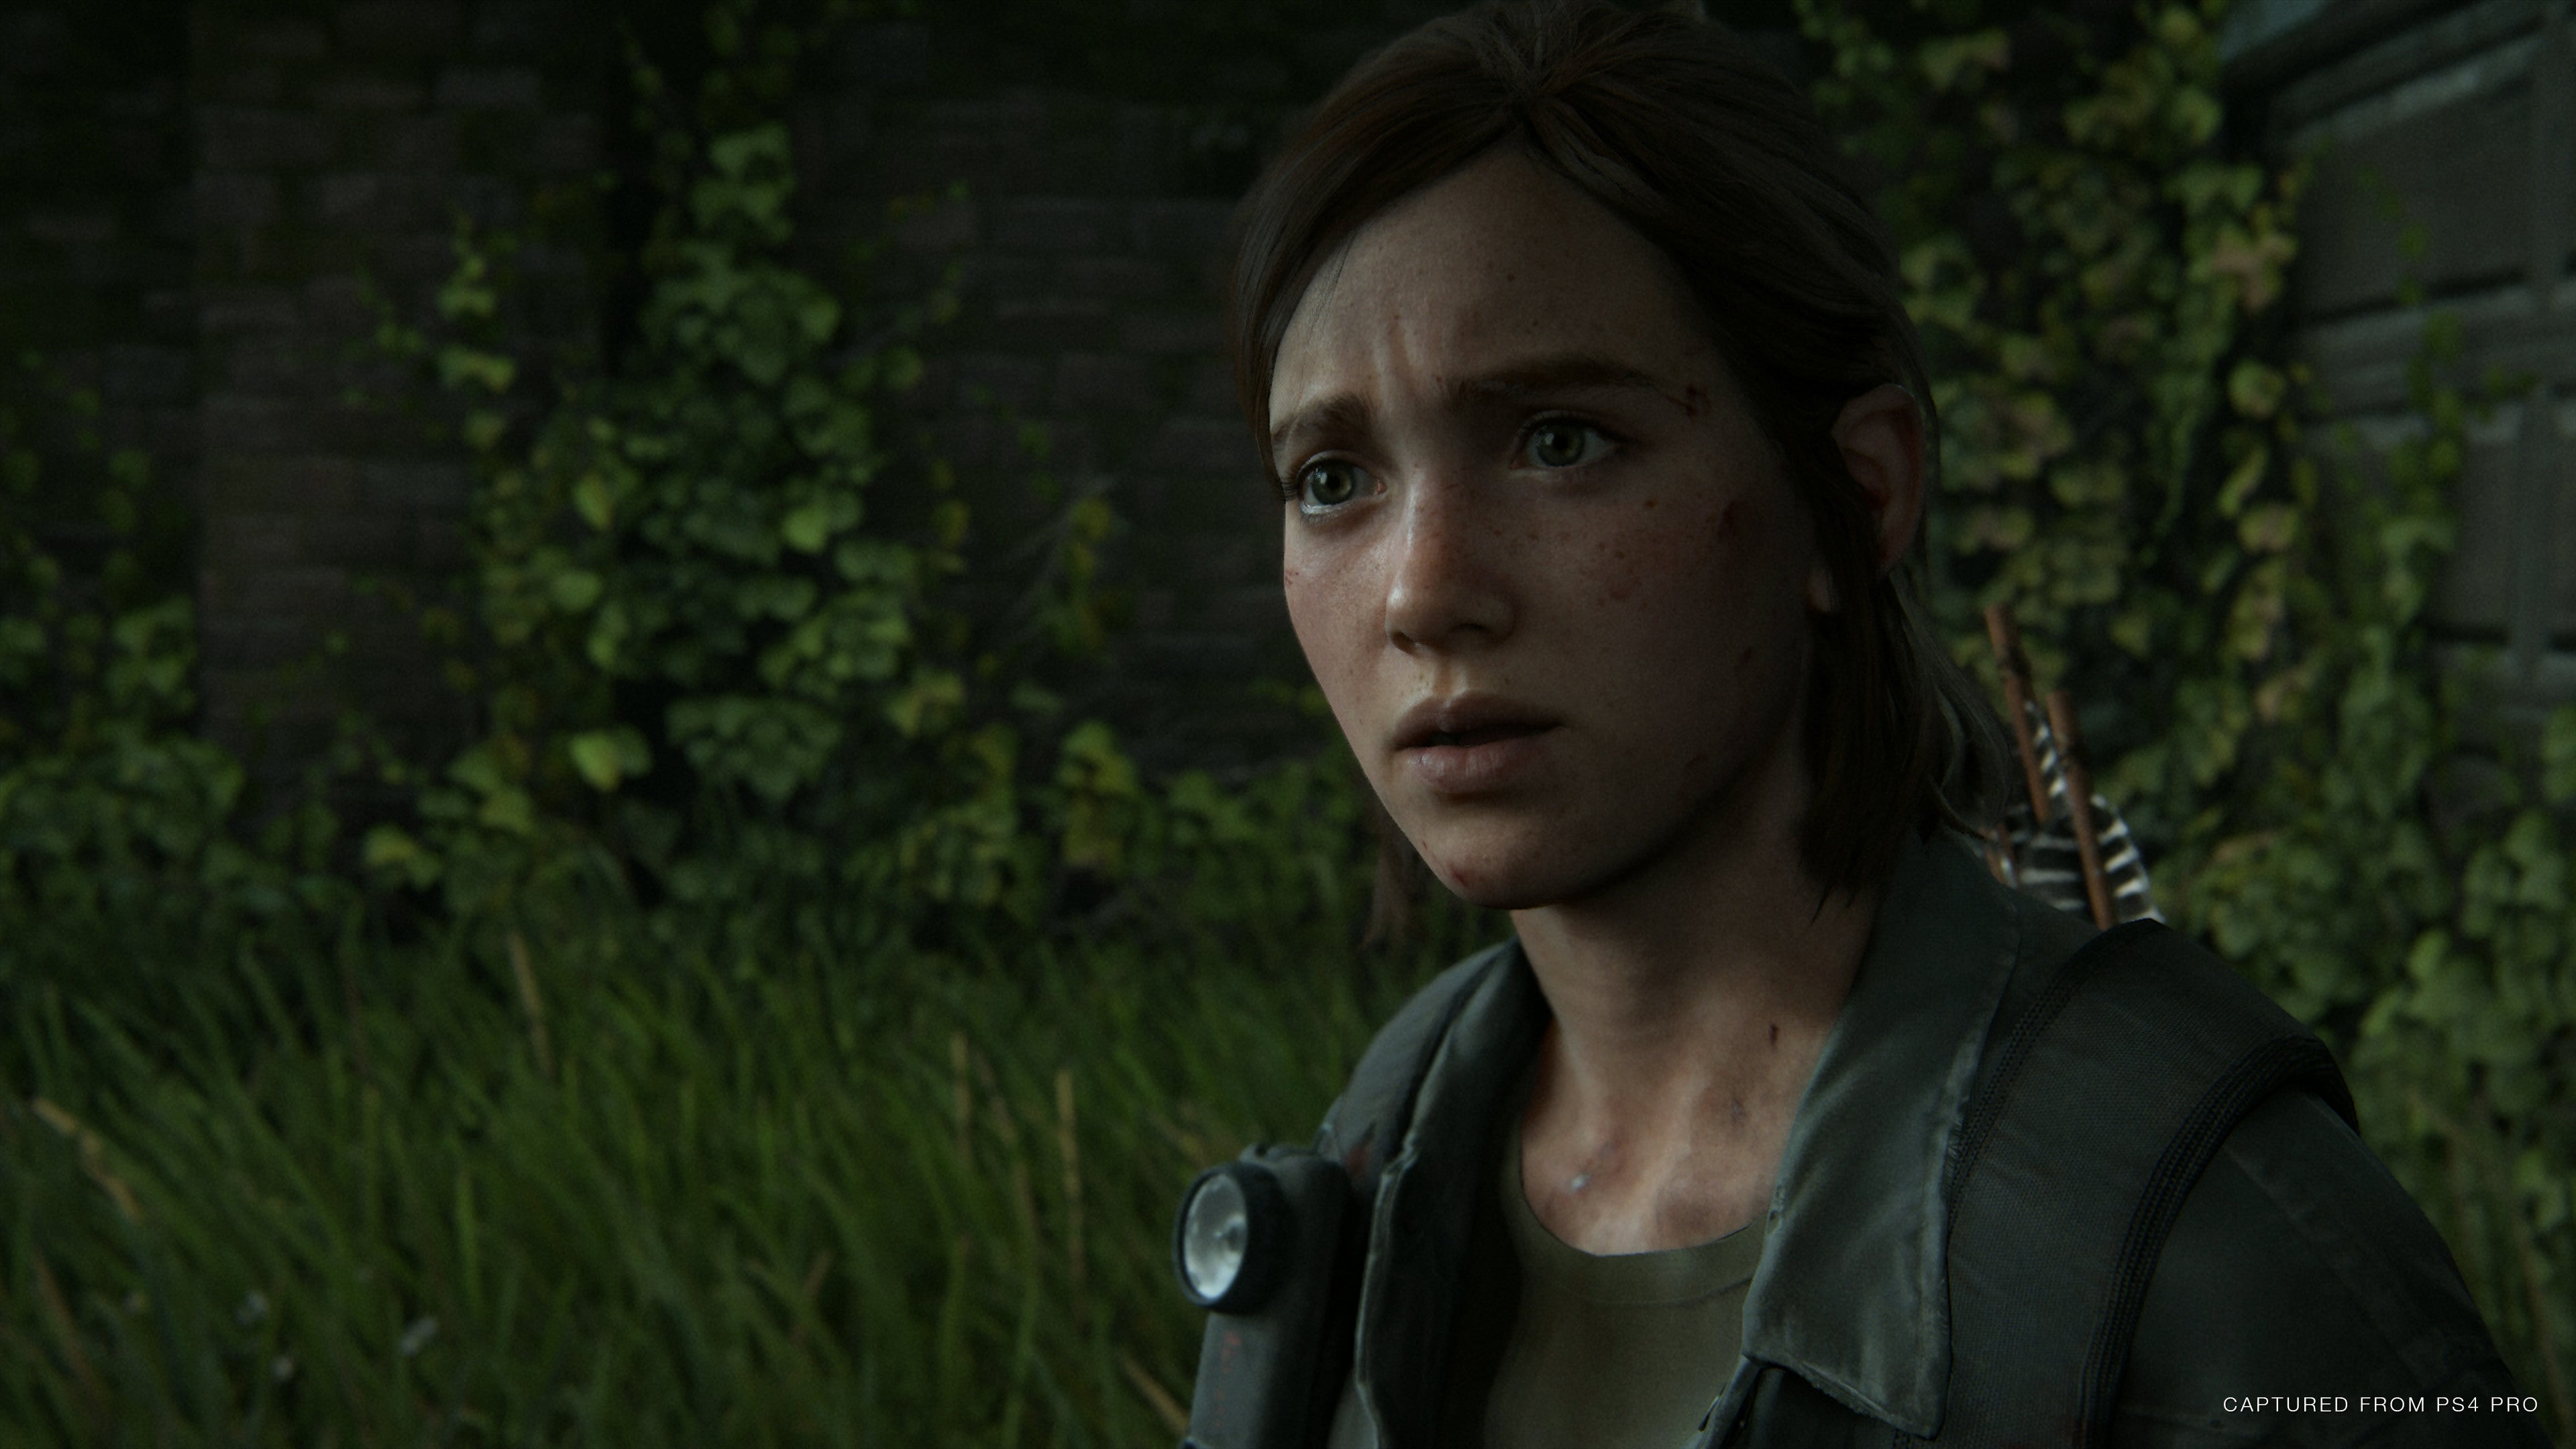 Image for Naughty Dog's success "due in large part to Sony's deep pockets," says former dev